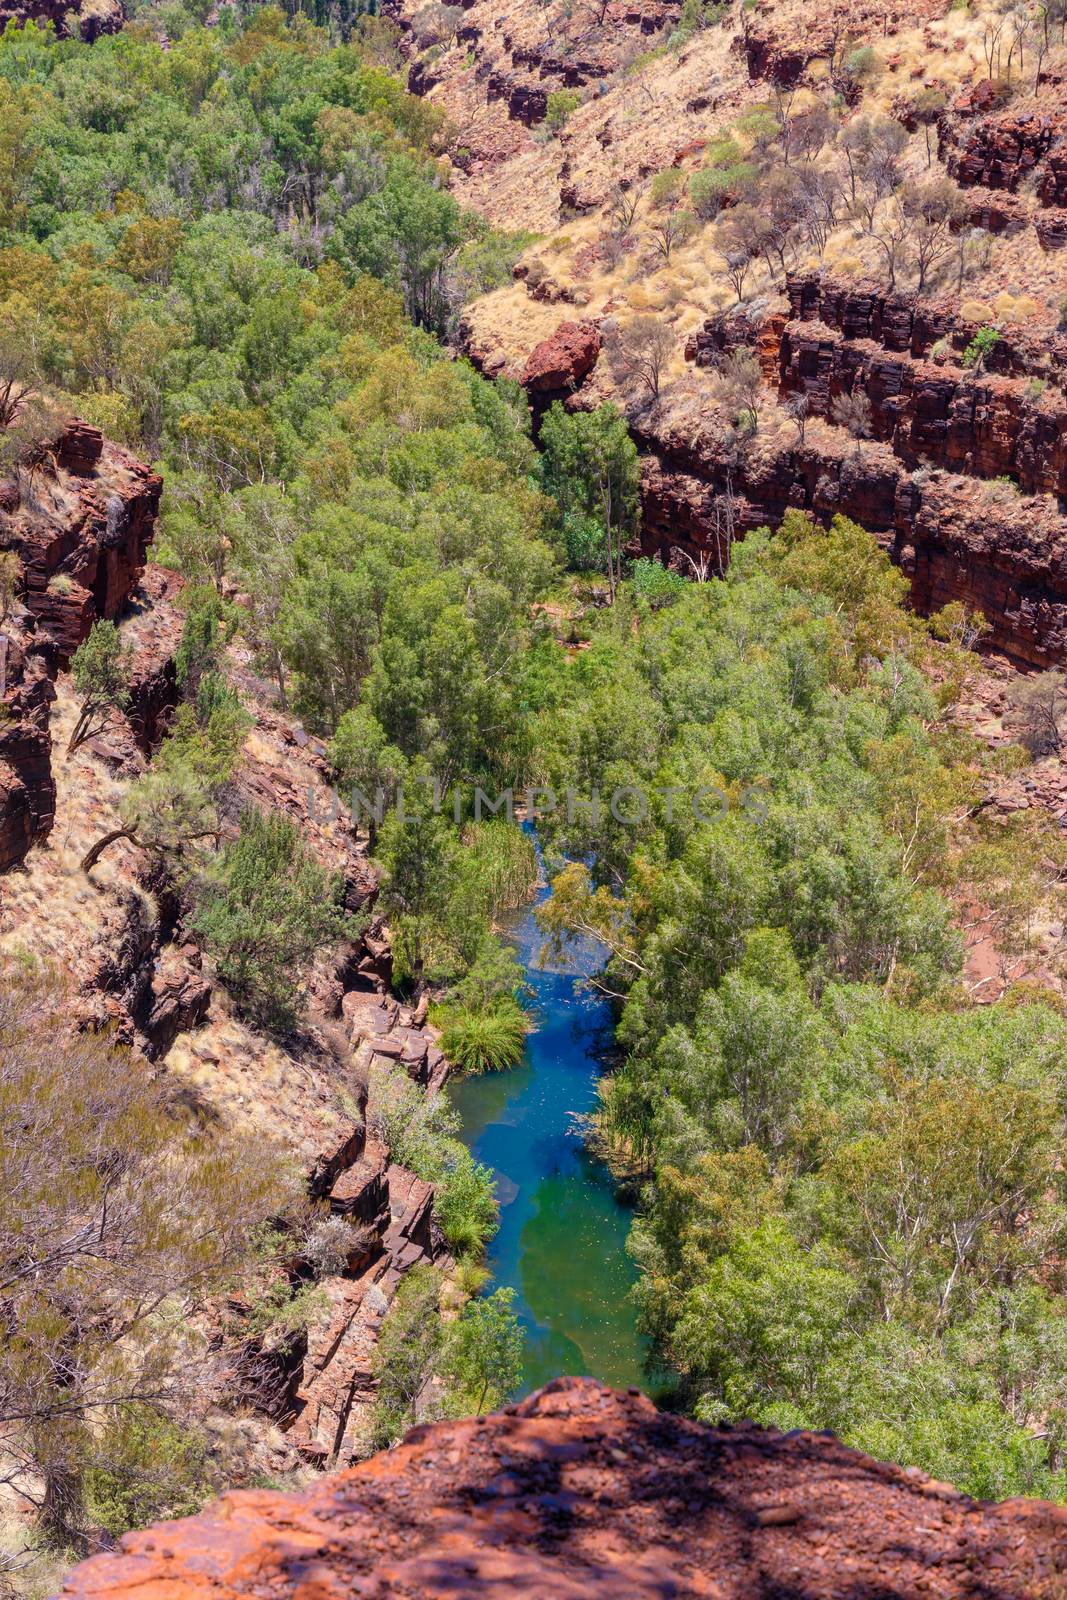 Green oasis eucalyptus trees and running water at the bottom of Dales Gorge Karijini National Park Australia